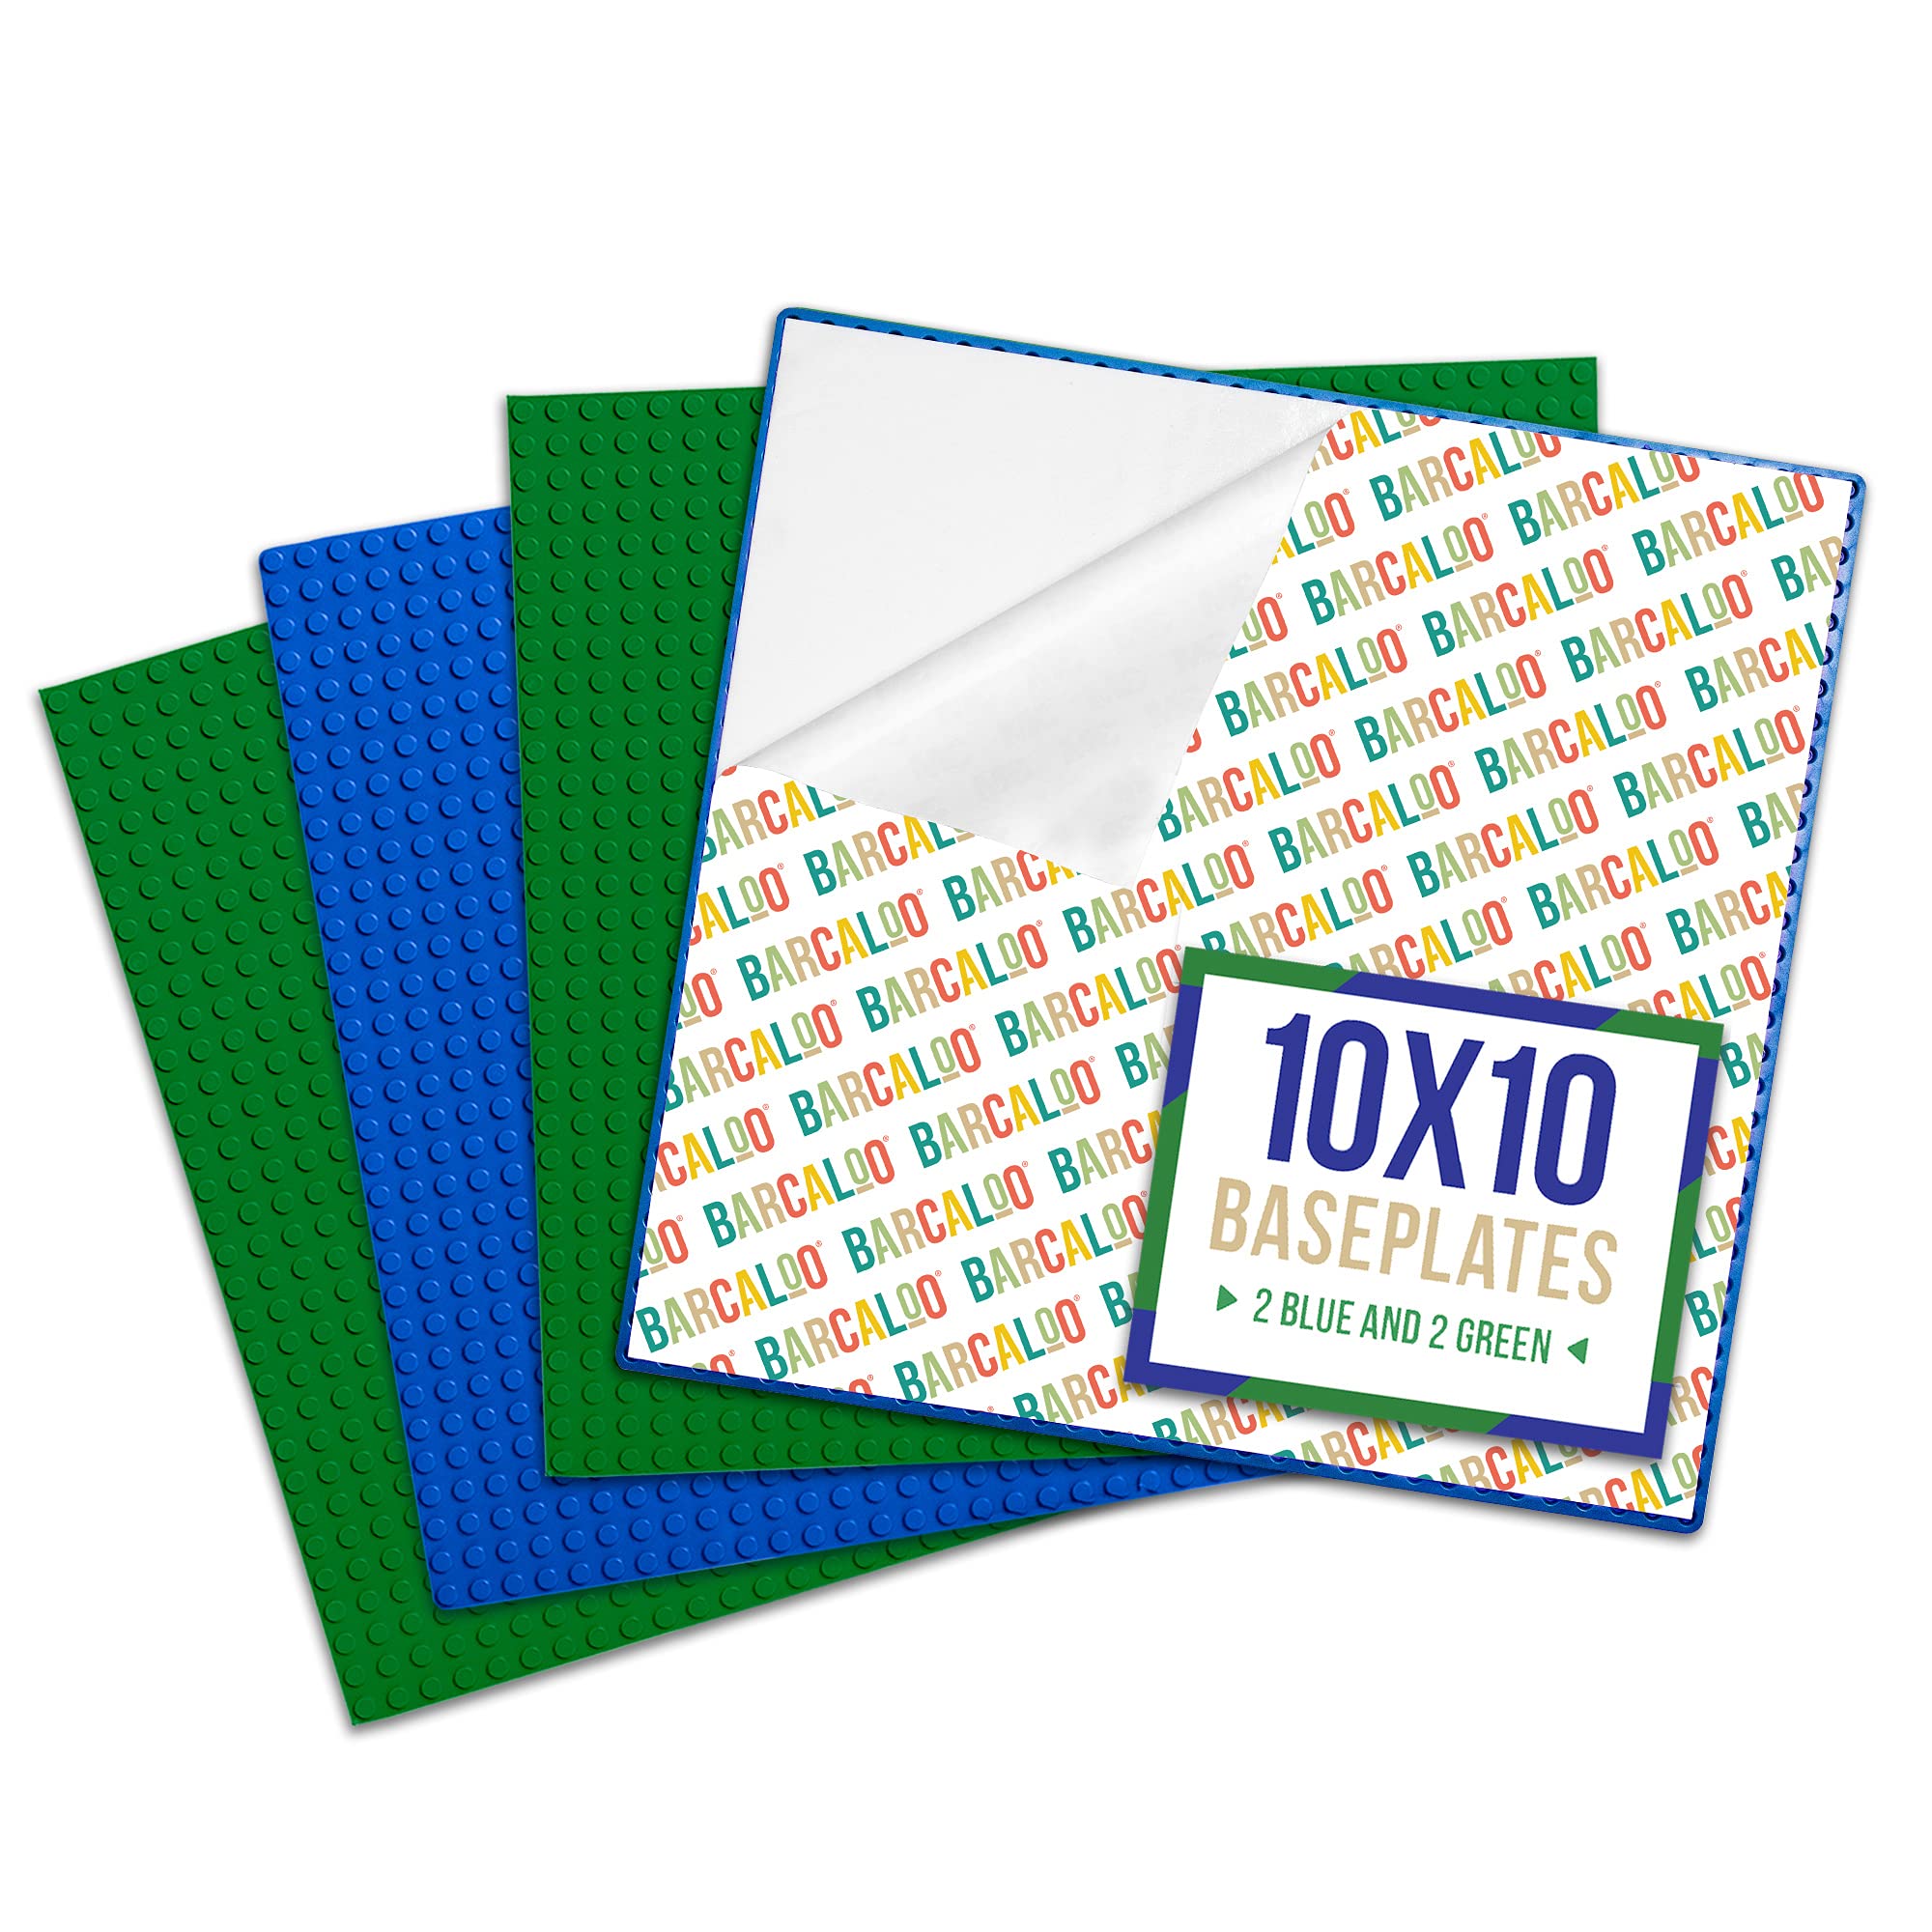 Book Cover Barcaloo Peel and Stick Baseplates - Self Adhesive Building Brick Plates for Table Top Play - 10 Inch x 10 Inch Adhesive Base Plate Panels, Compatible with All Major Brands - 4 Pack, (2 Blue, 2 Green) 2 Blue & 2 Green Baseplates Peel & Stick